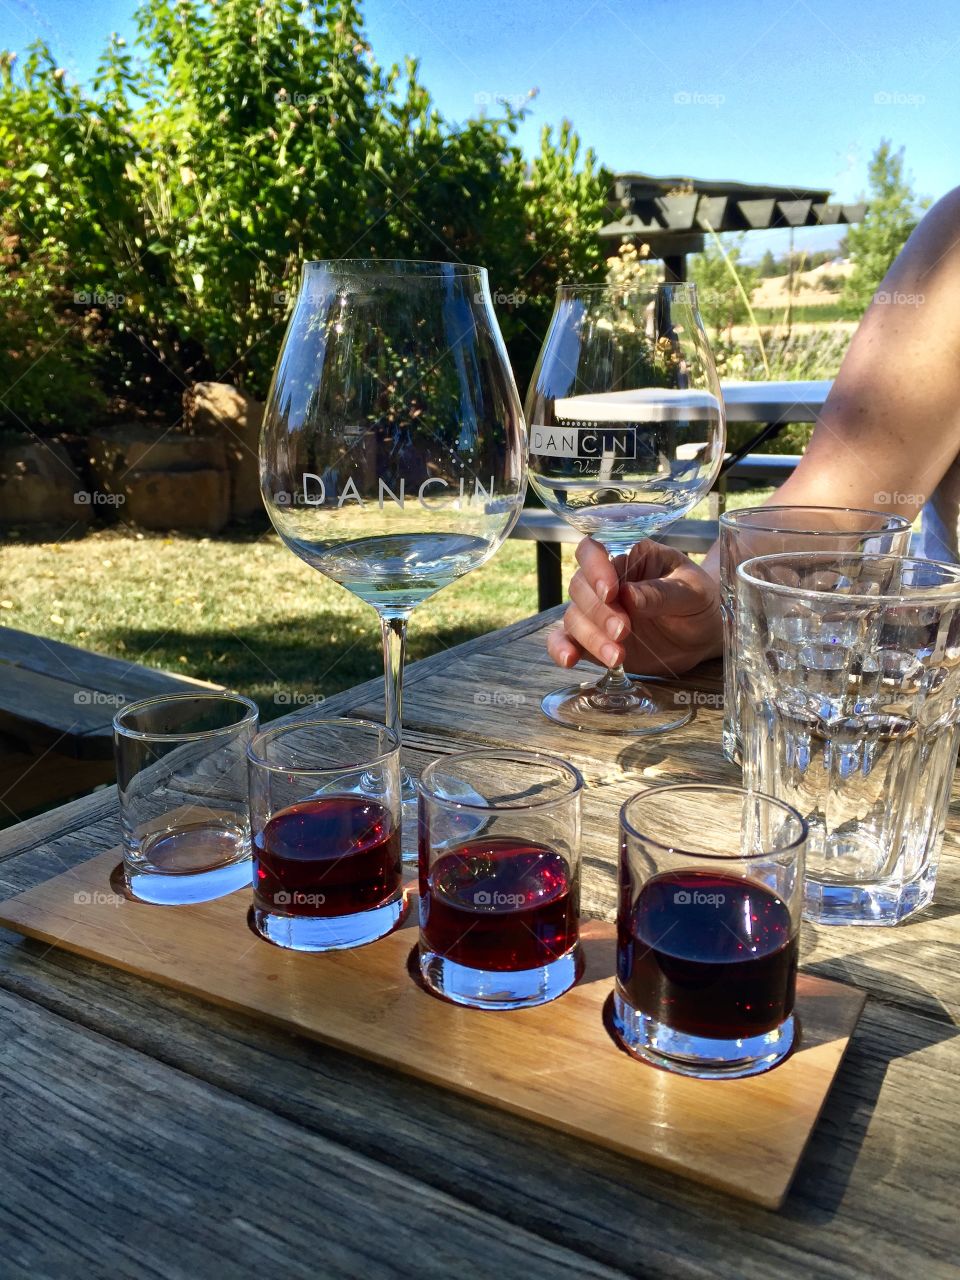 Wine tasting with friends on a sunny summer day at DanCin winery, Medford, Oregon. 